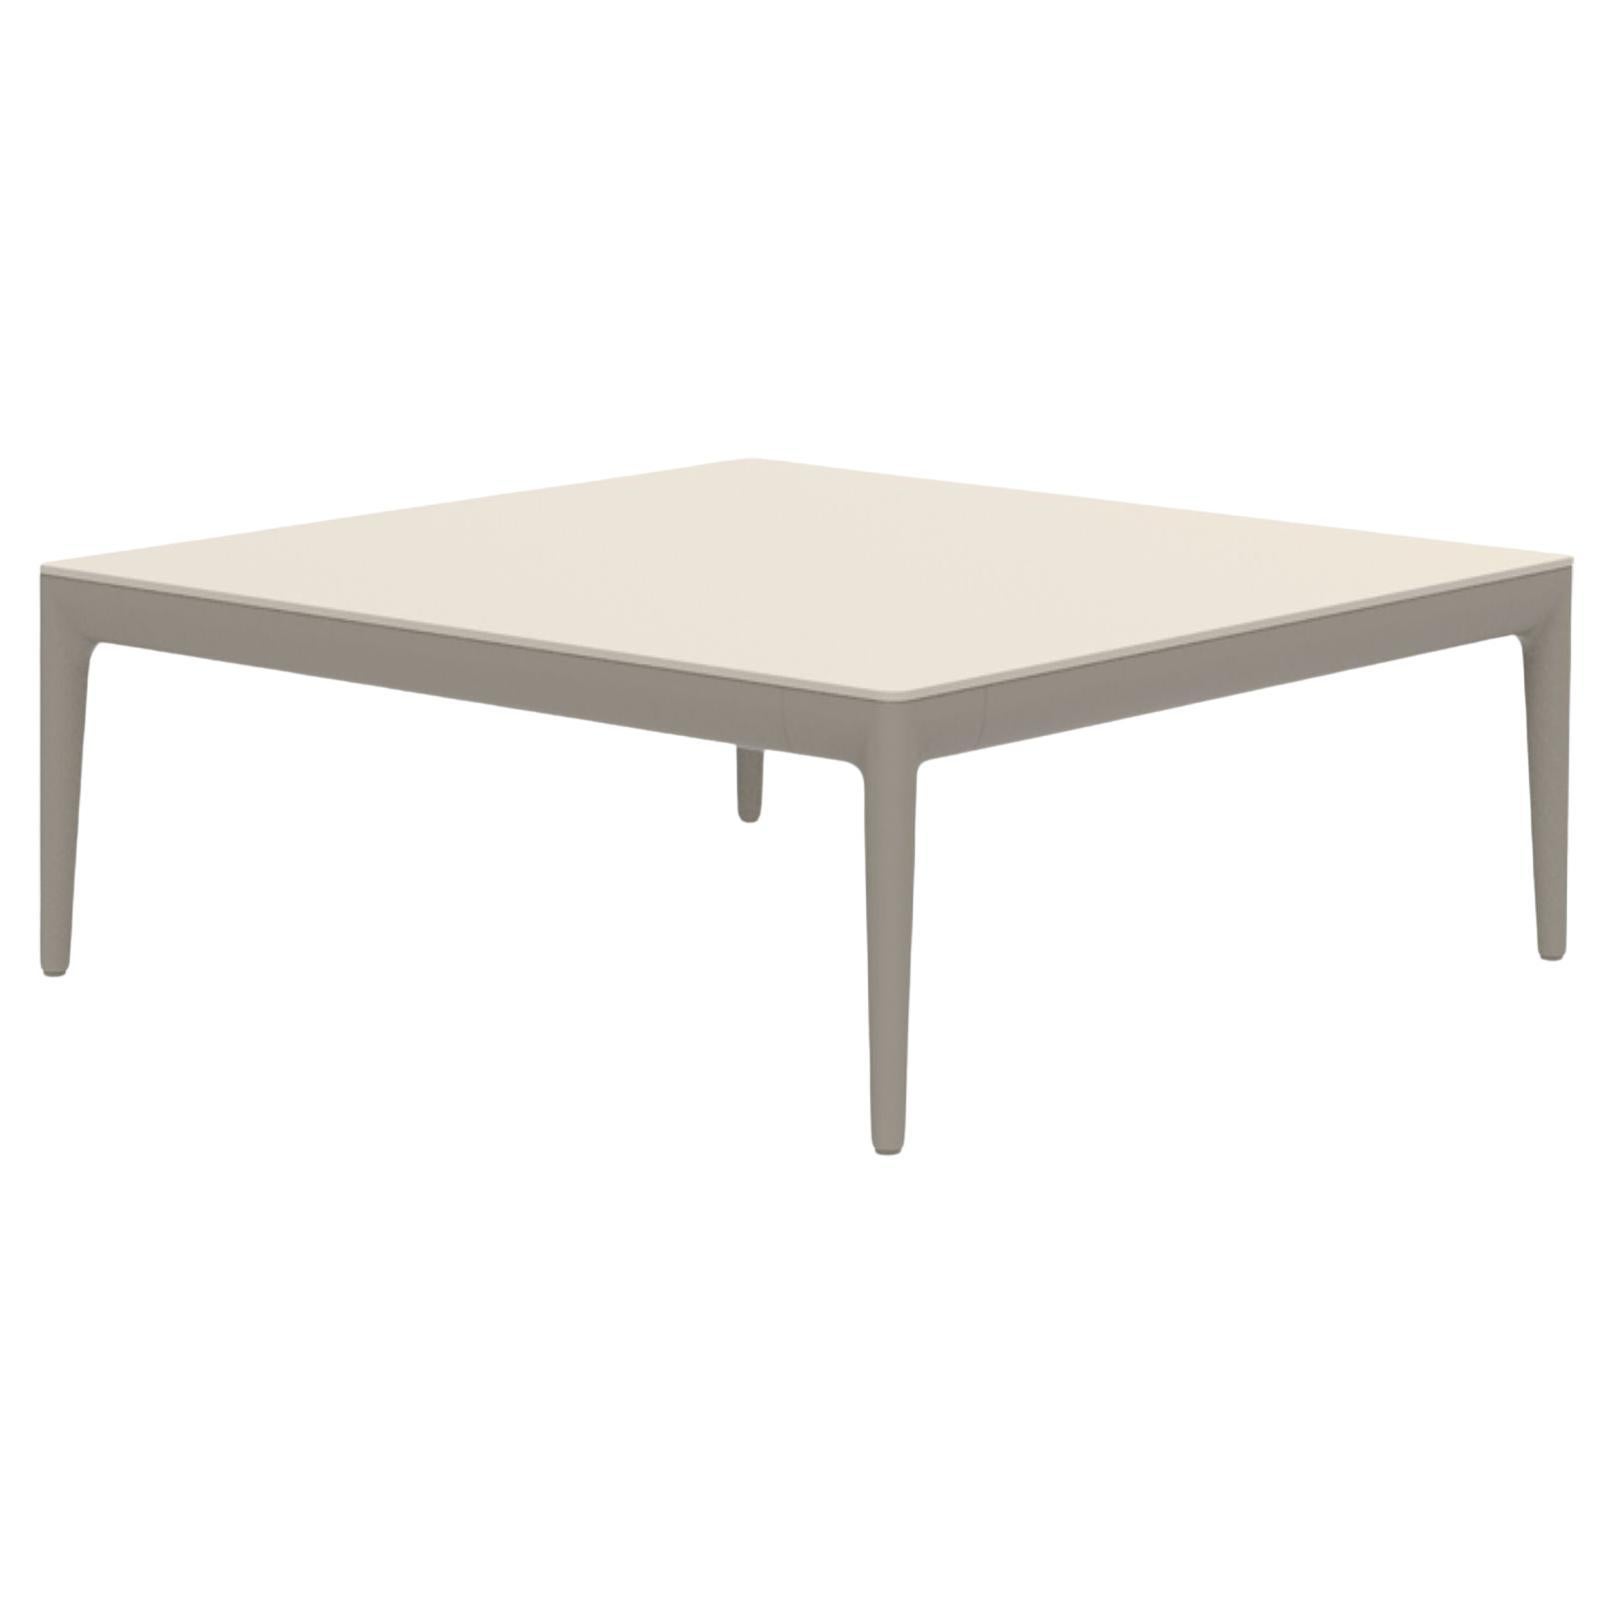 Ribbons Cream 76 Coffee Table by Mowee For Sale